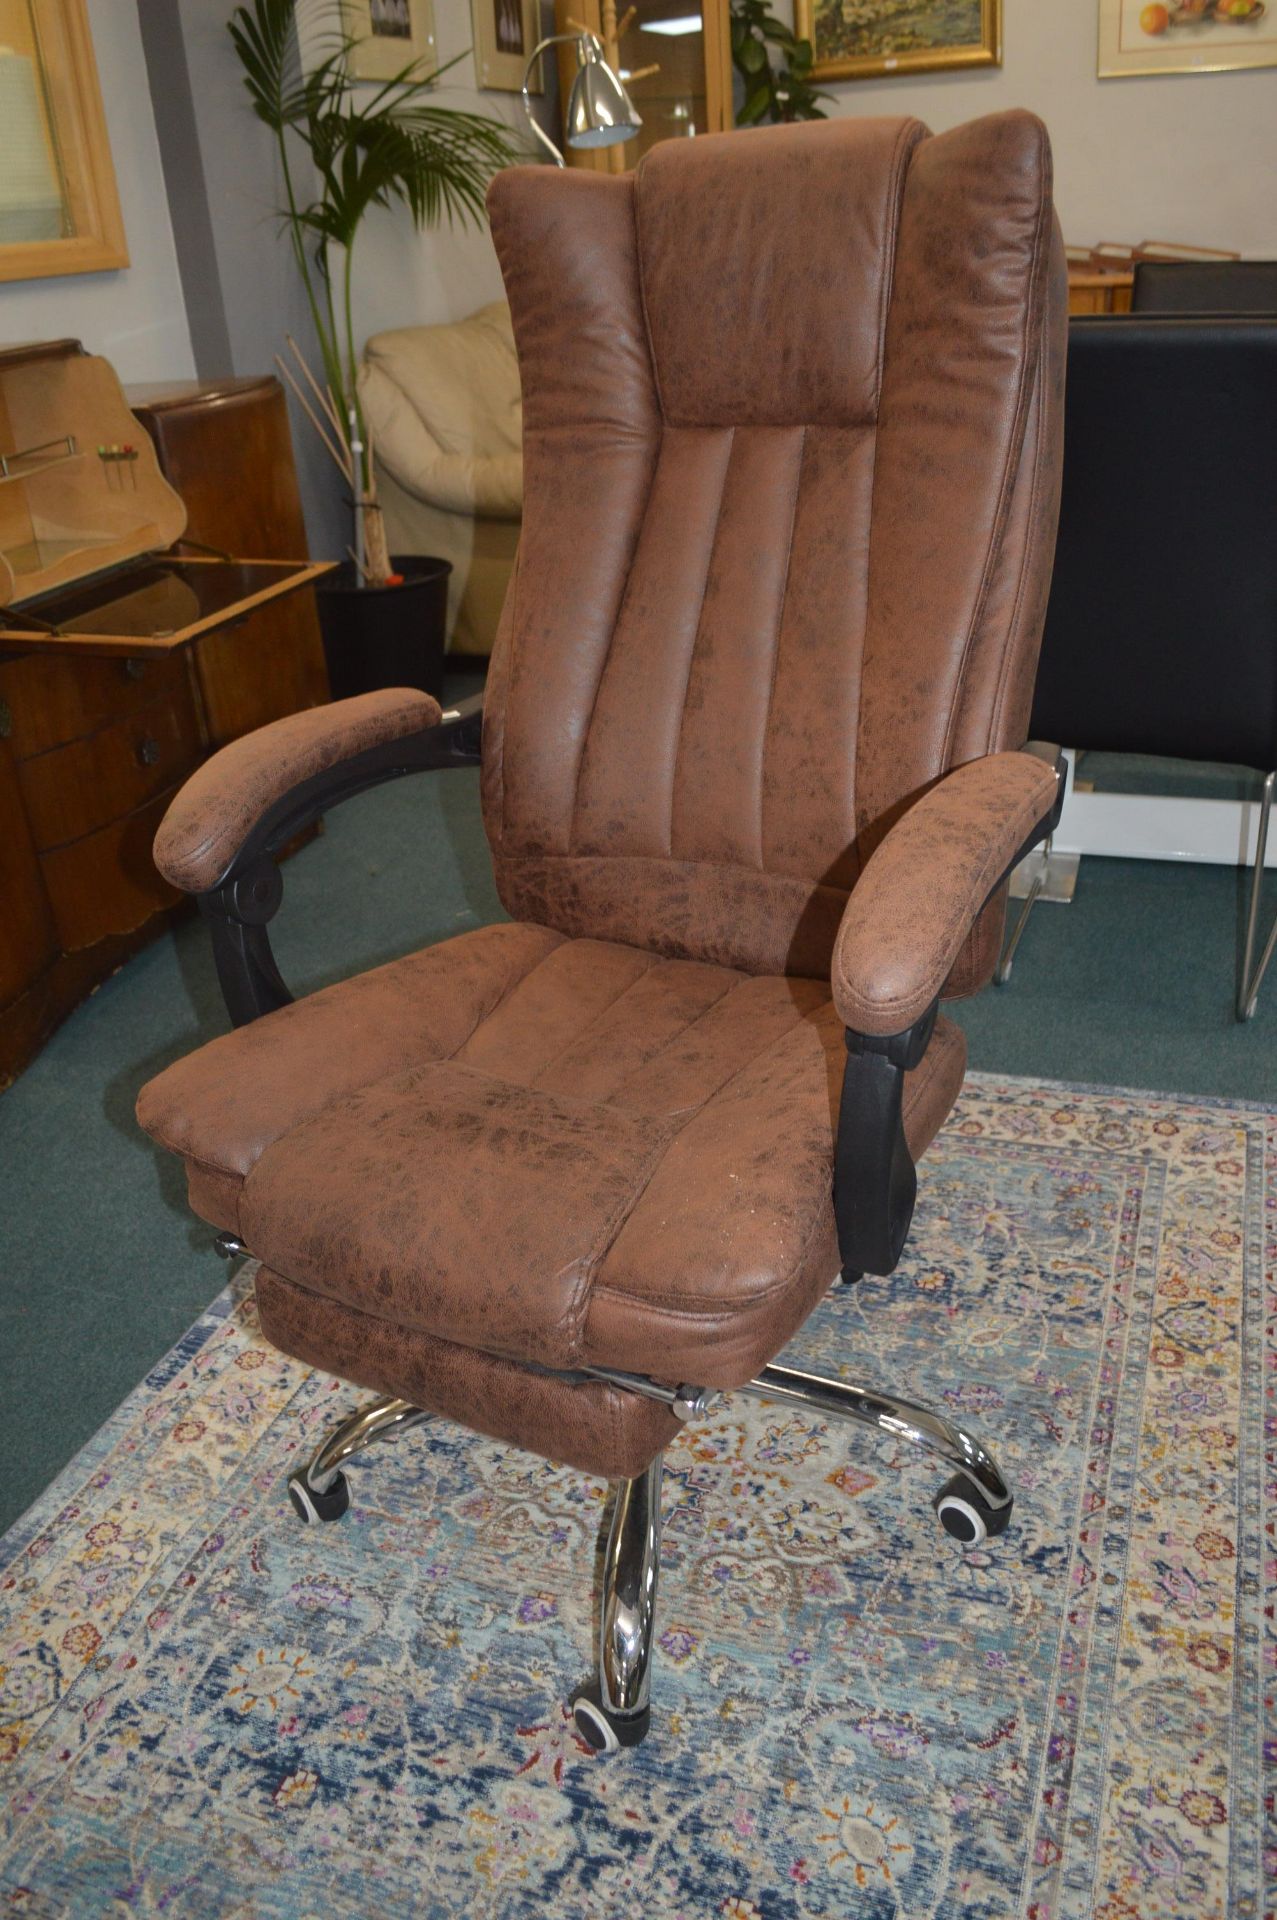 Distressed Leather Effect Swivel Chair with Extend - Image 3 of 3